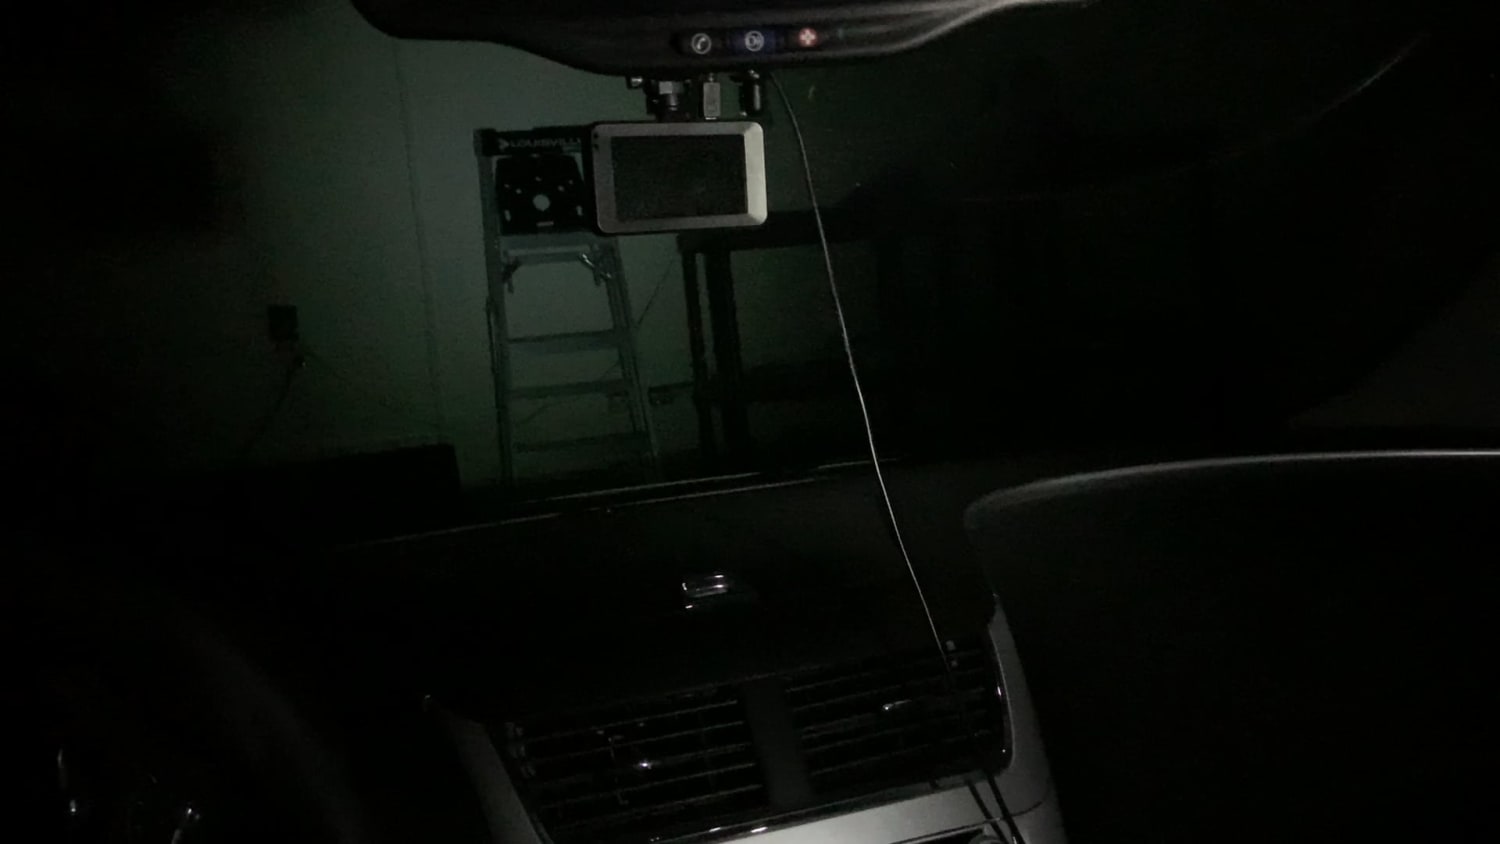 Sometimes I like to sit in my car for a bit after I pull into the garage upon returning home, and it can get a little creepy when the lights go out.